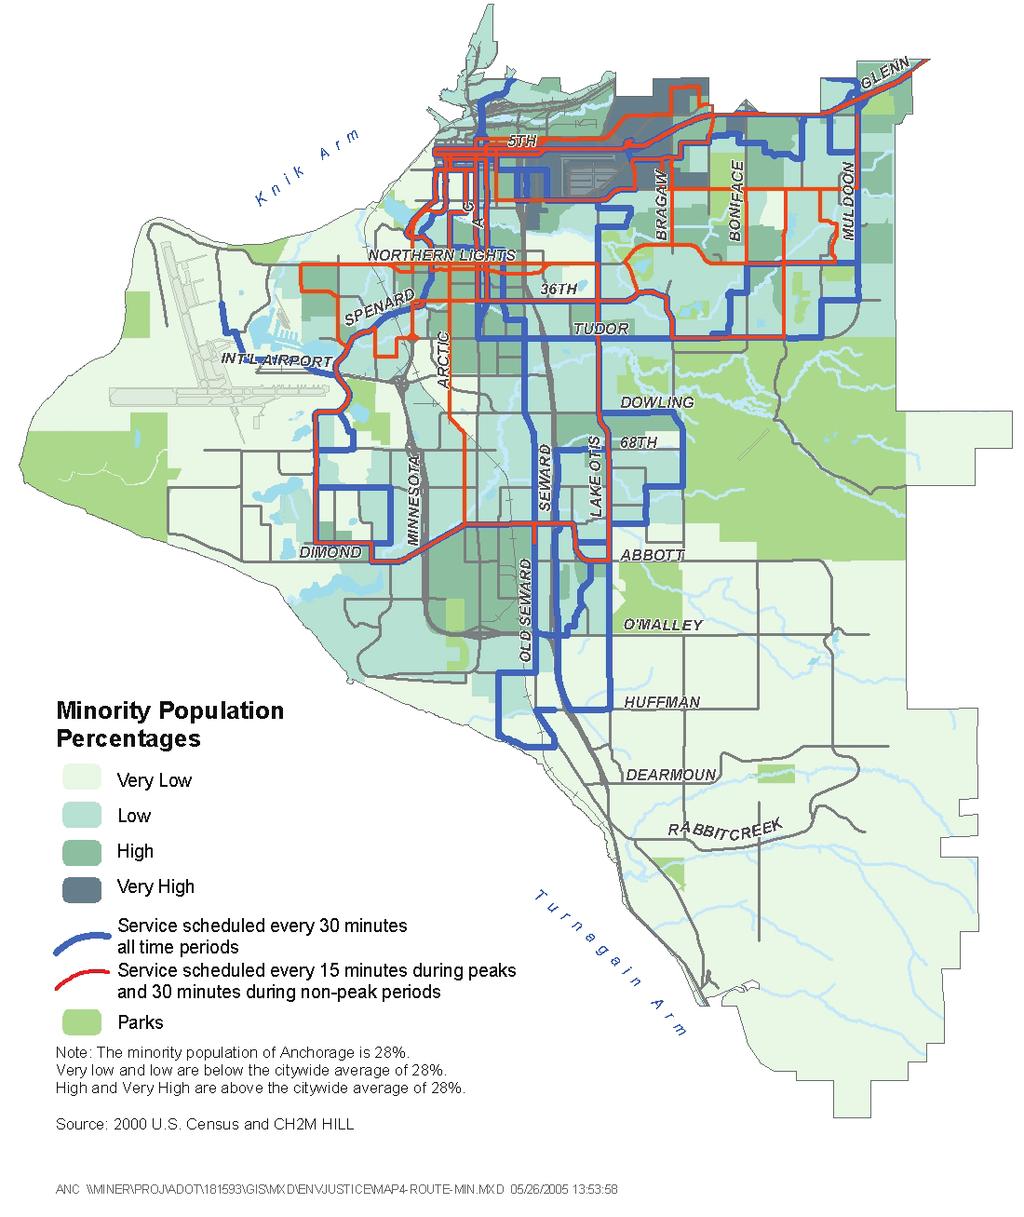 Recommended Bus System Routes and Concentrations of